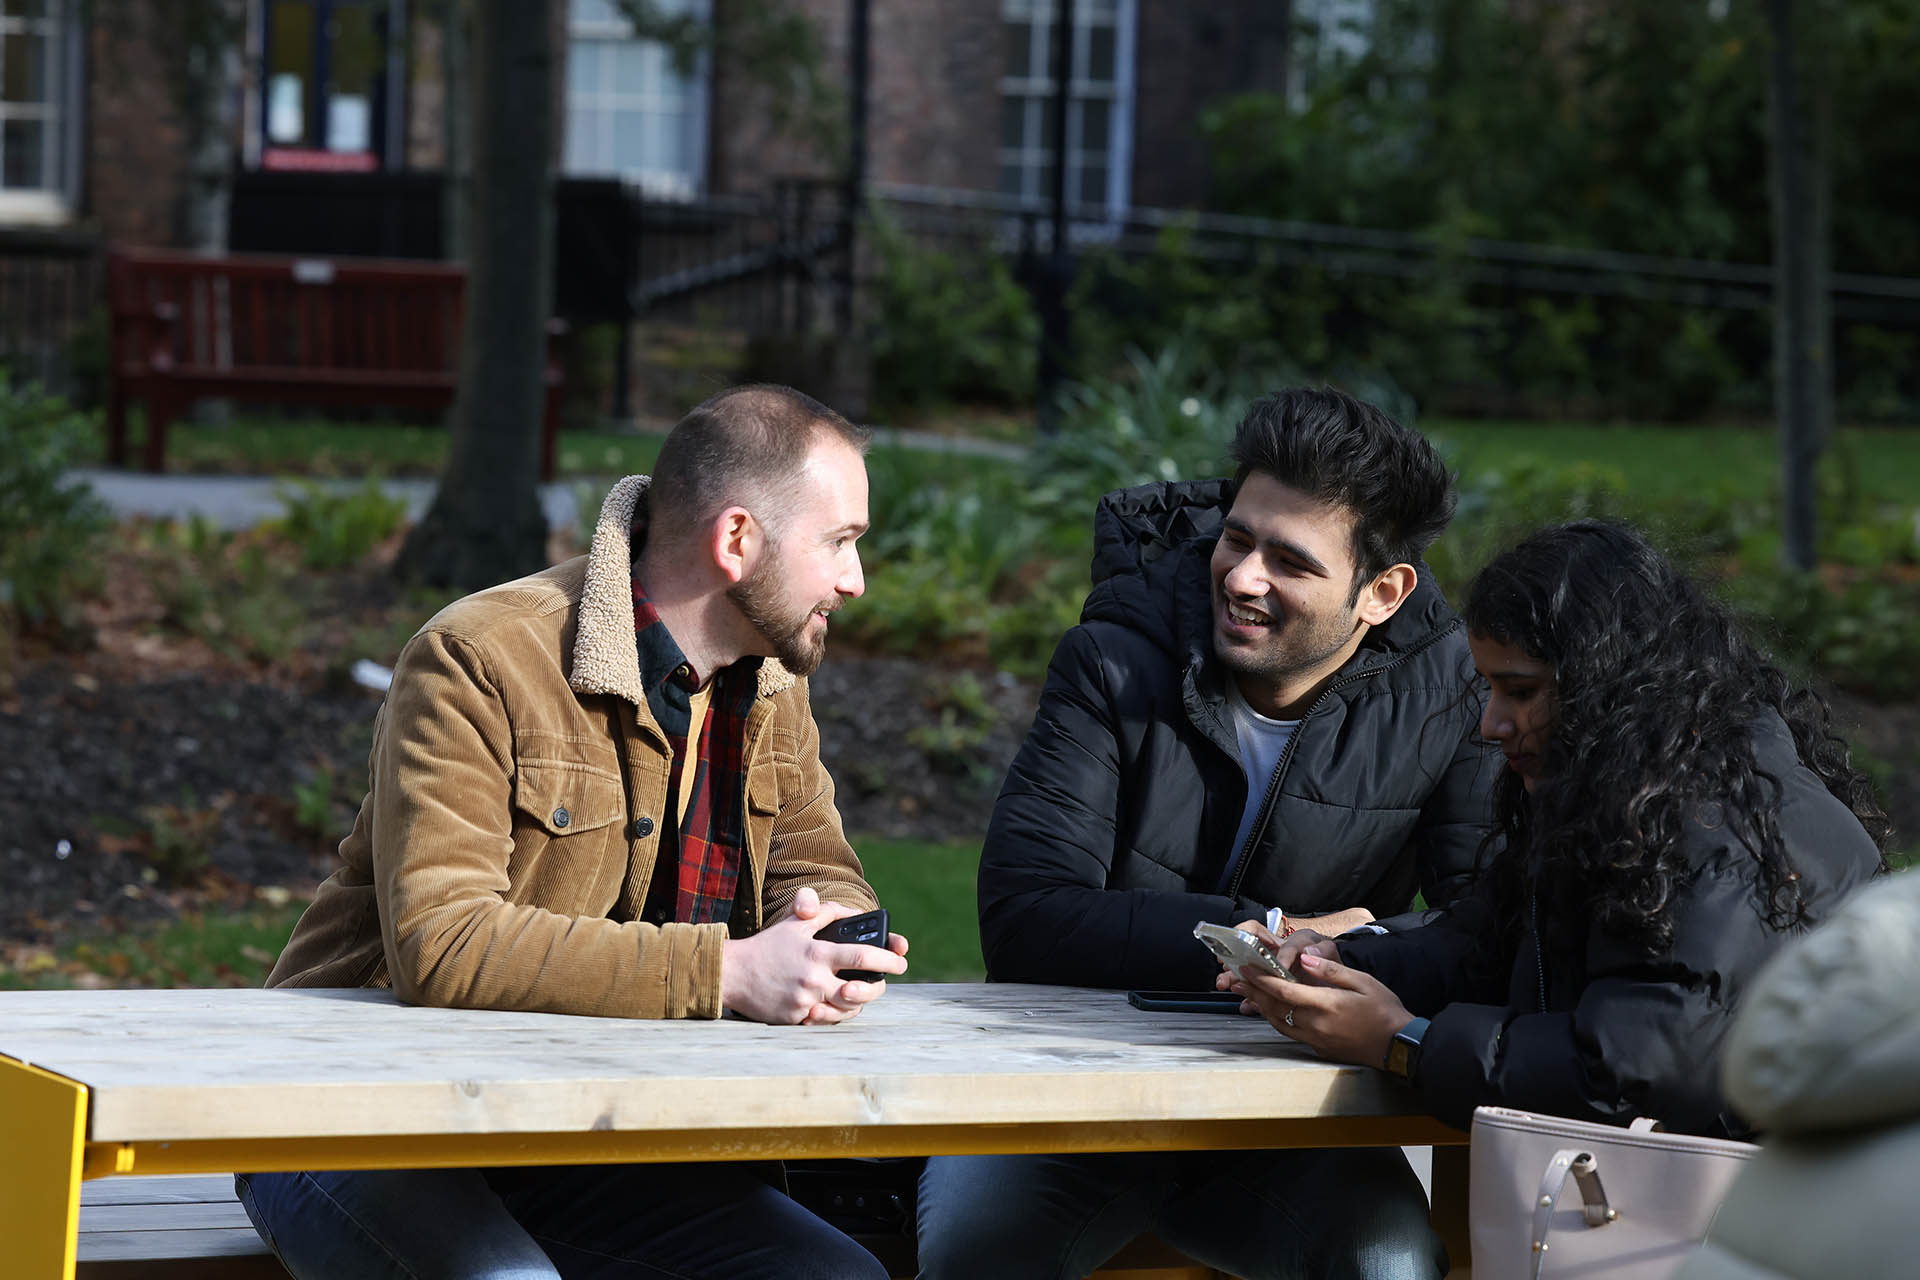 Postgraduate students sitting chatting around a table